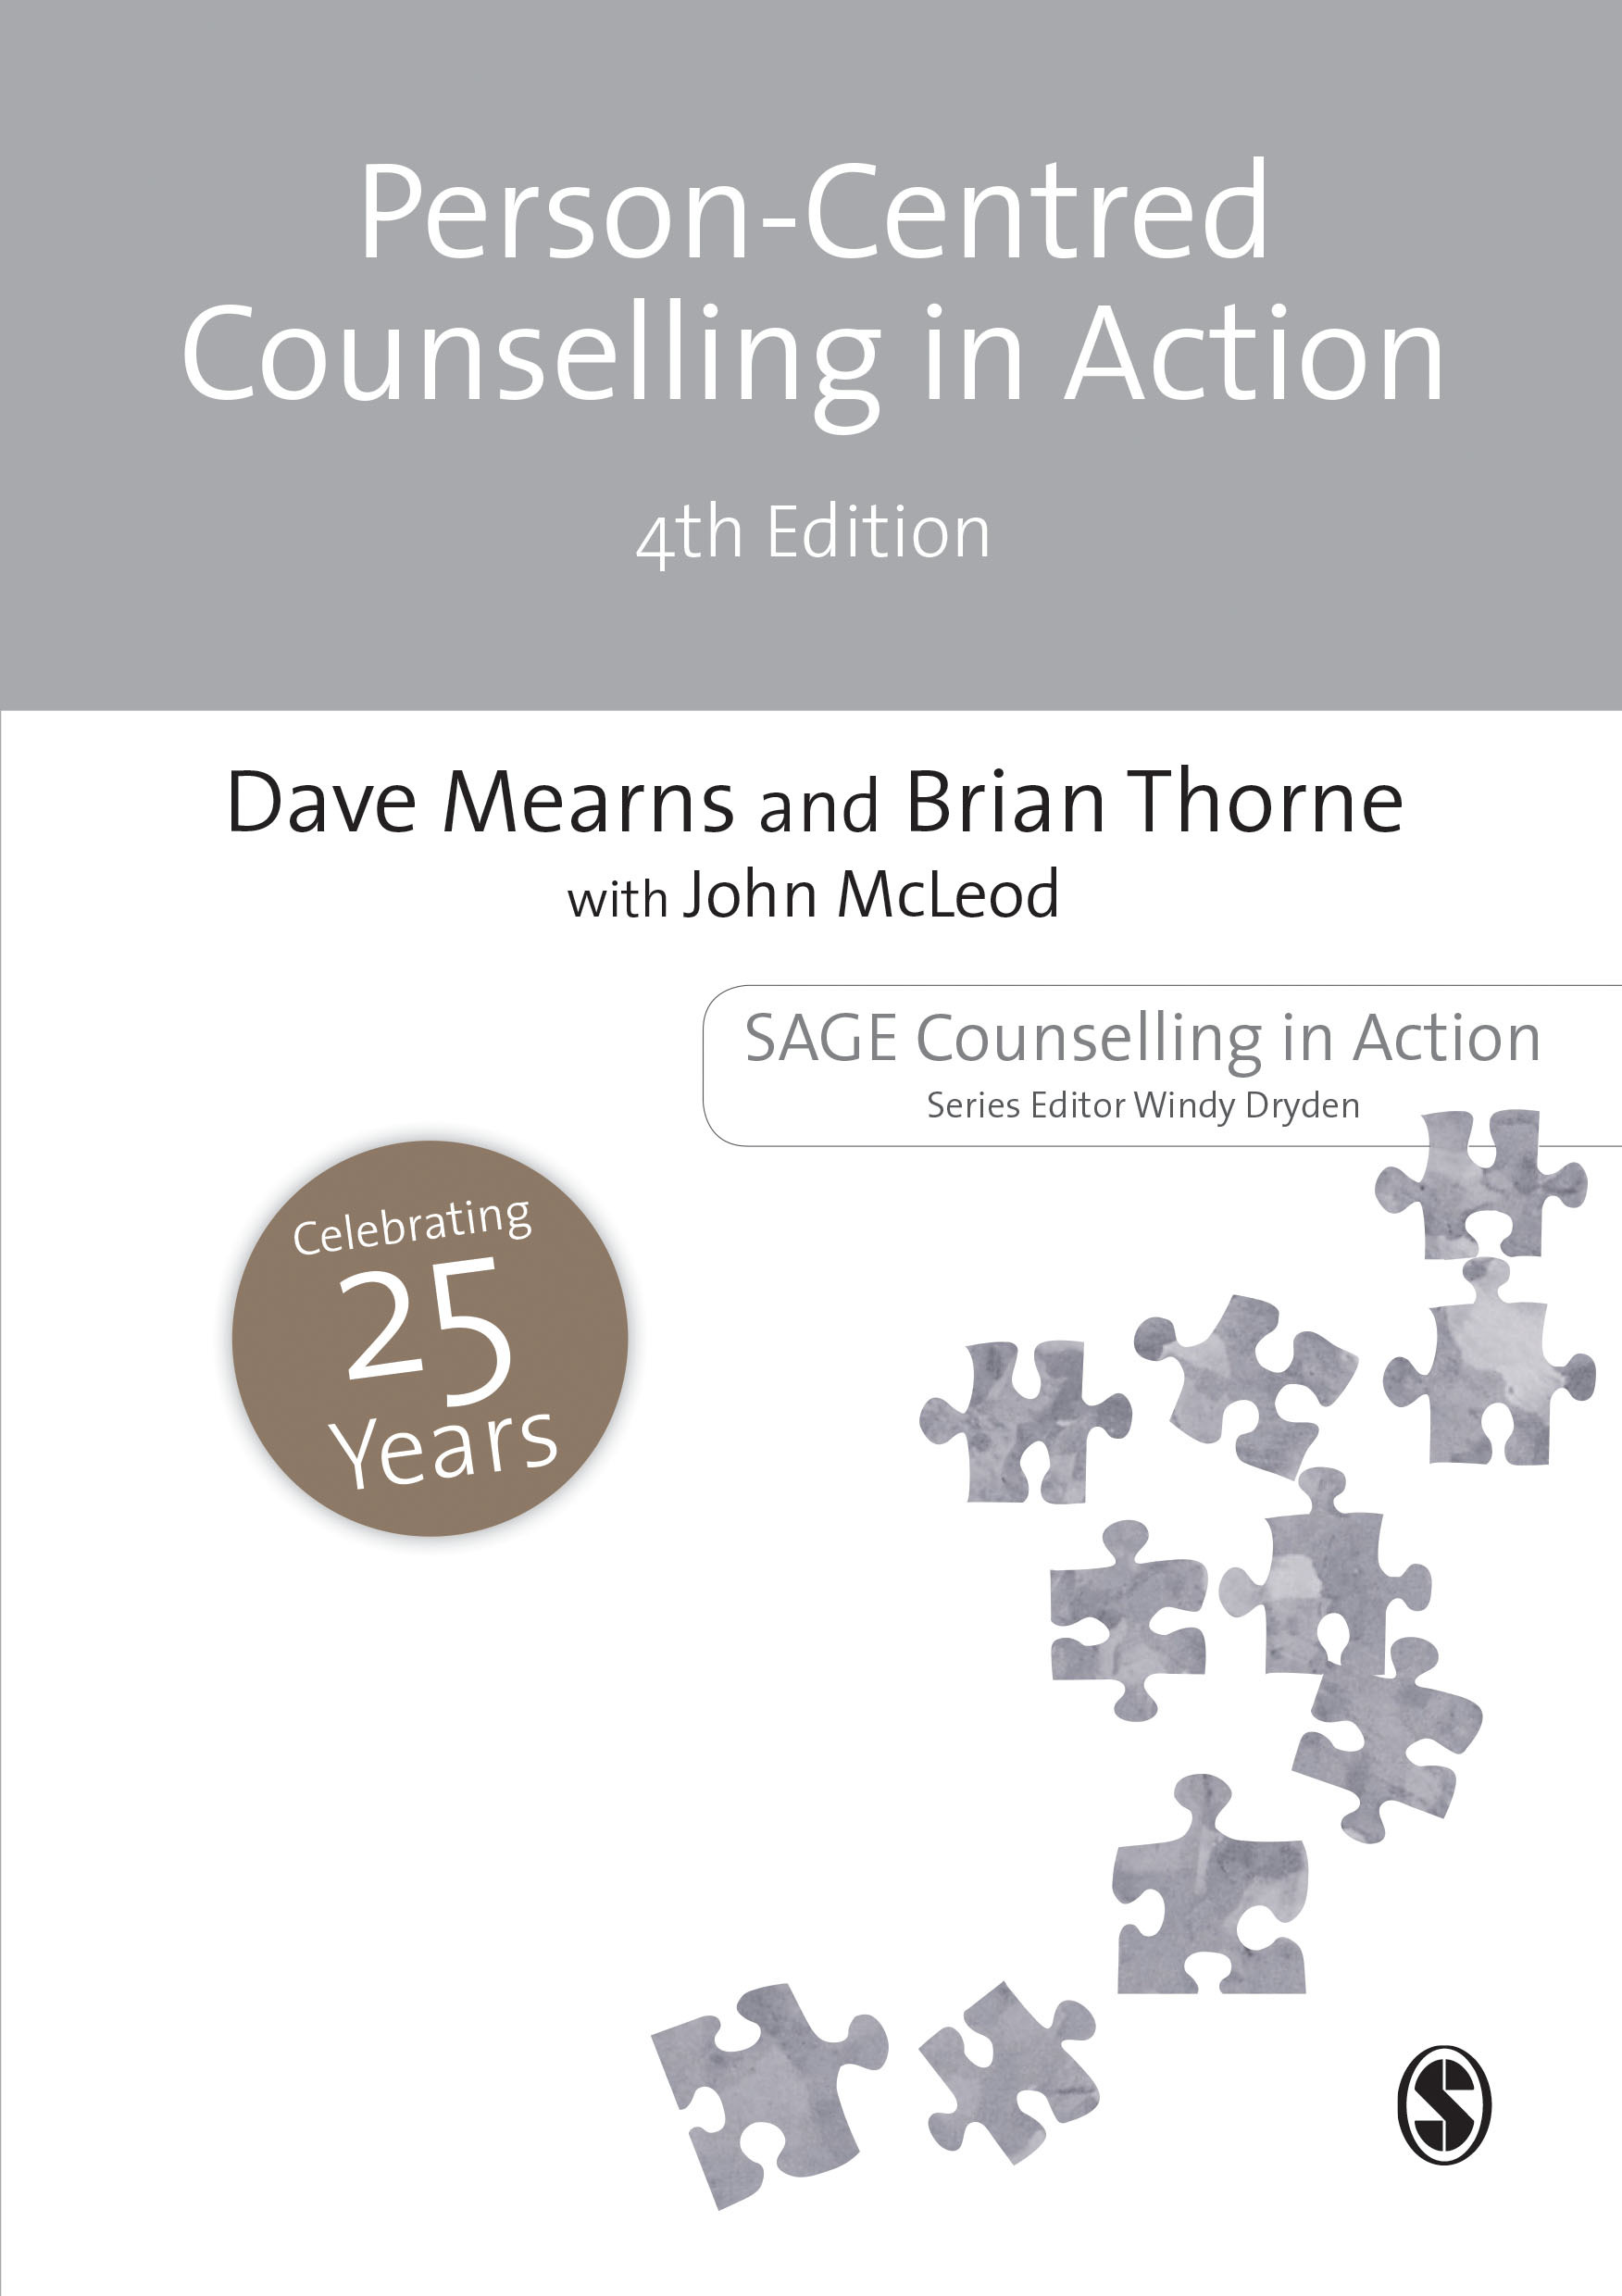 Person-Centred Counselling in Action book cover image 